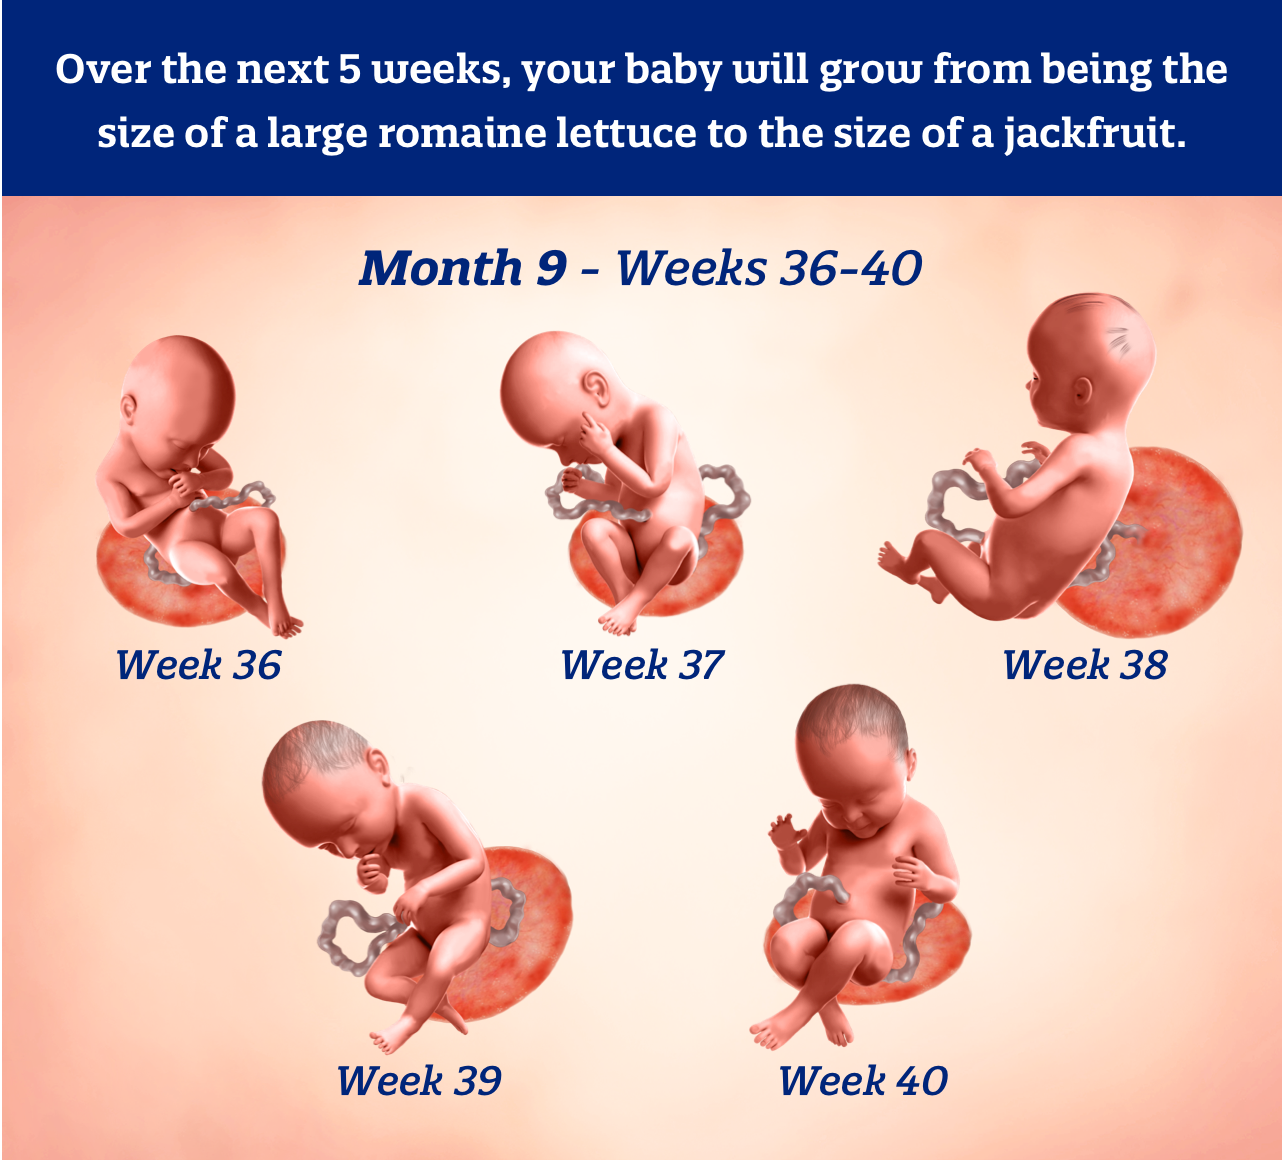 Month 9 weeks 36-40: Over the next 5 weeks, your baby will grow from being the size of a large romaine lettuce to the size of a jackfruit.